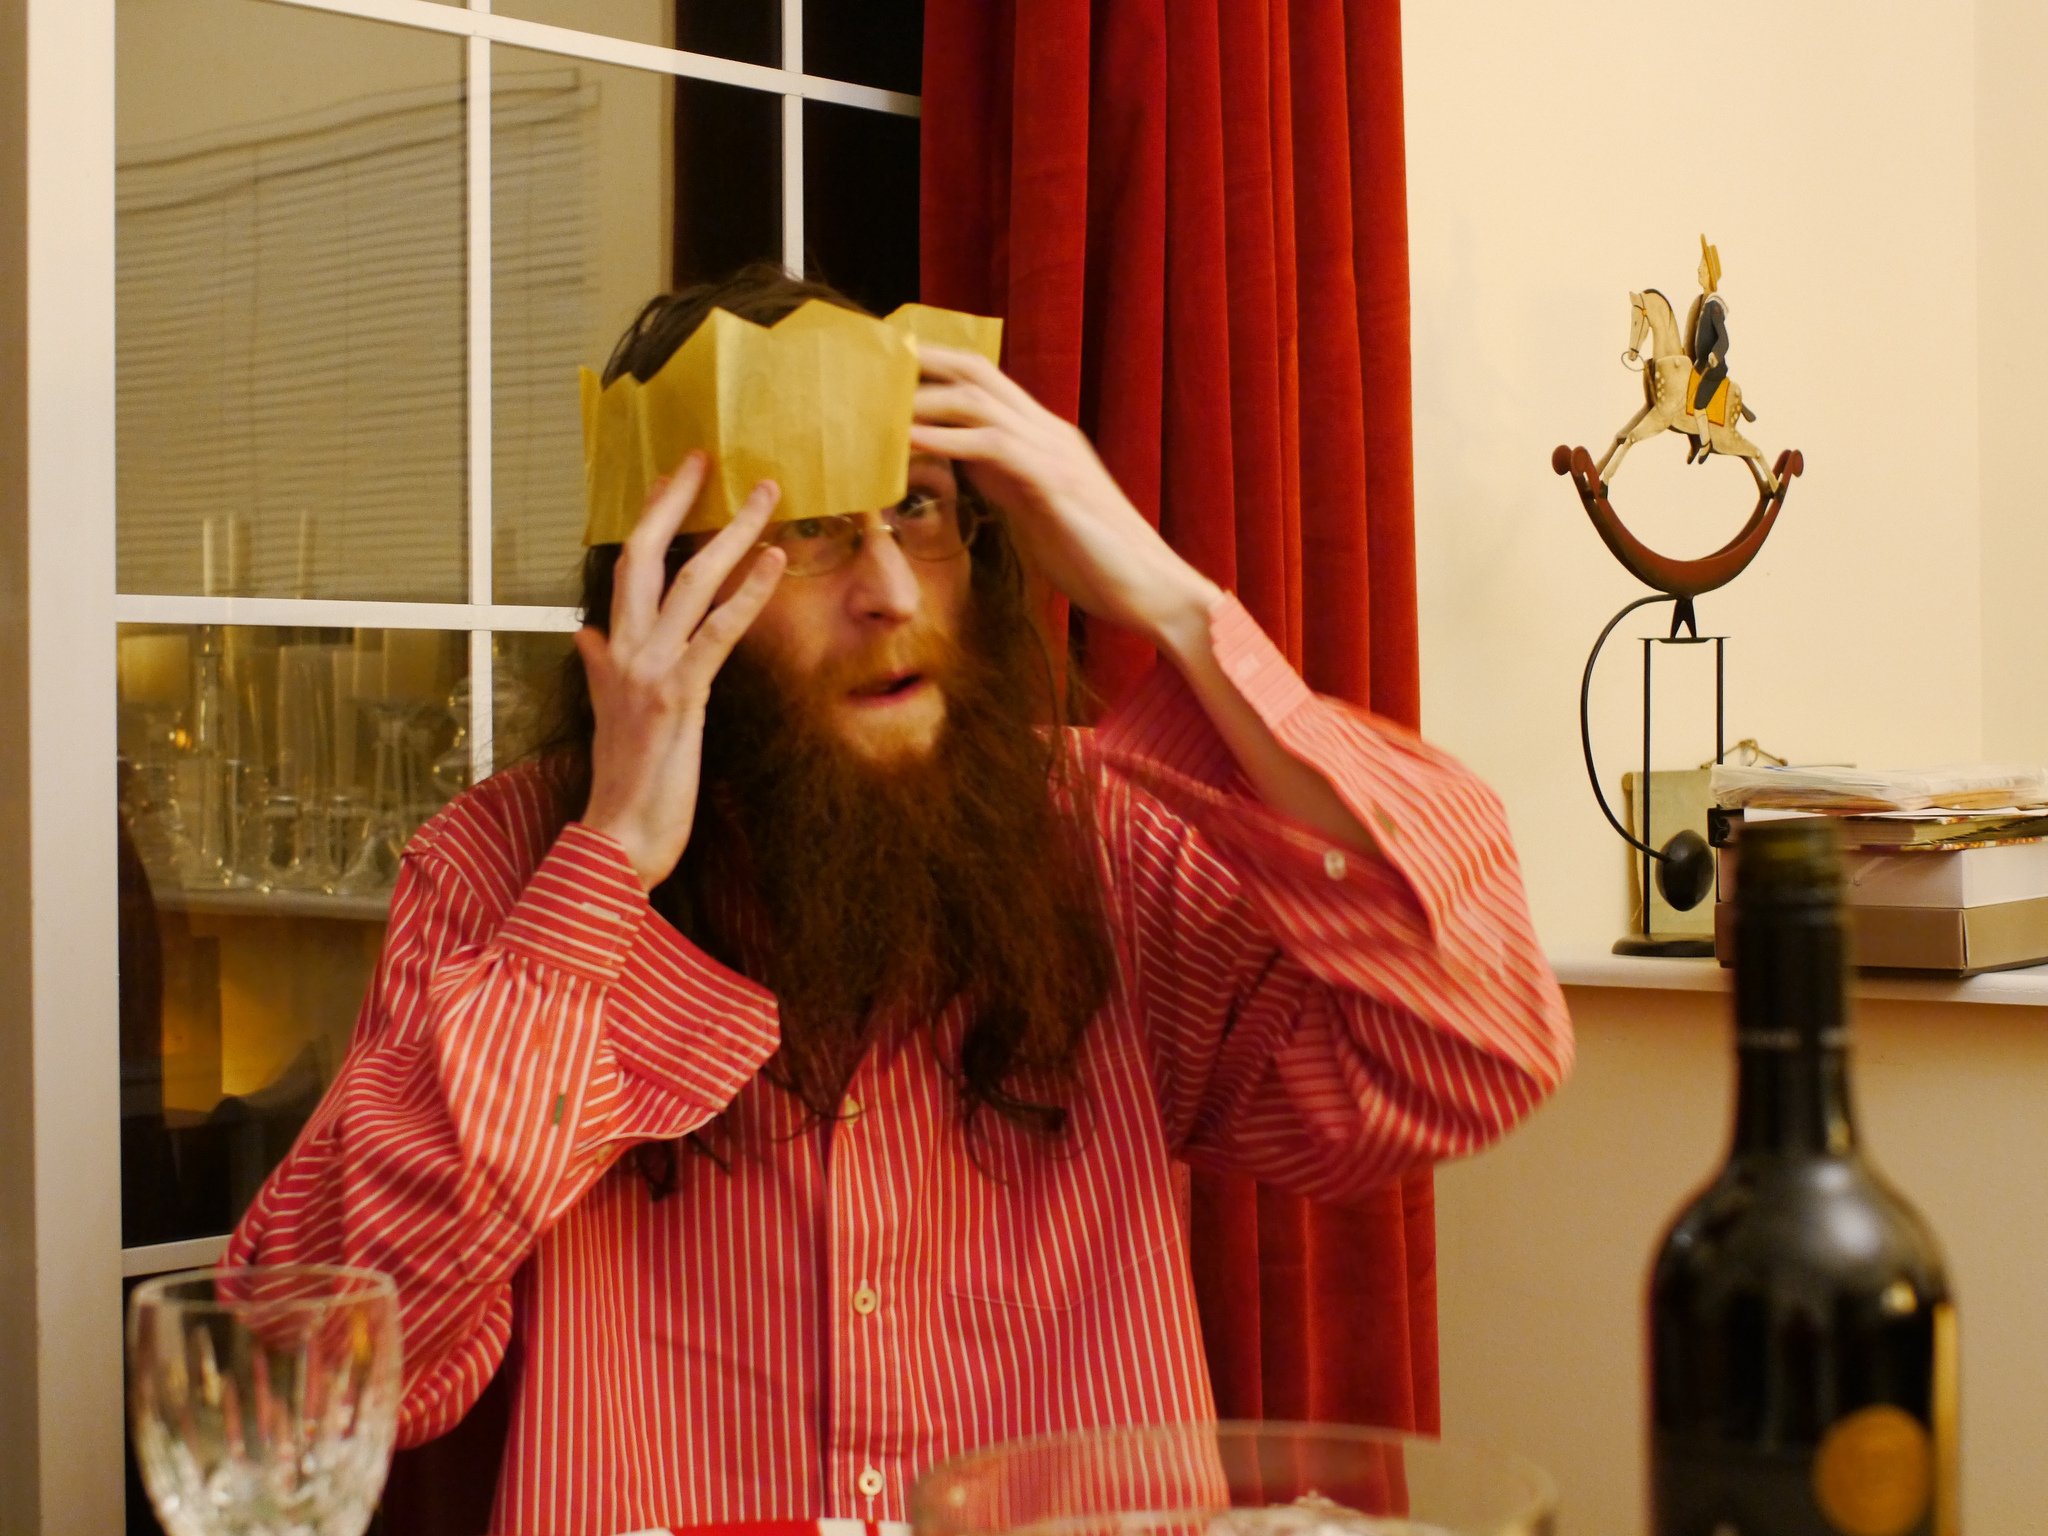 Image credit: Flickr/Sanickels. Just this this gentleman, you too could be crowned King of the Crackers.